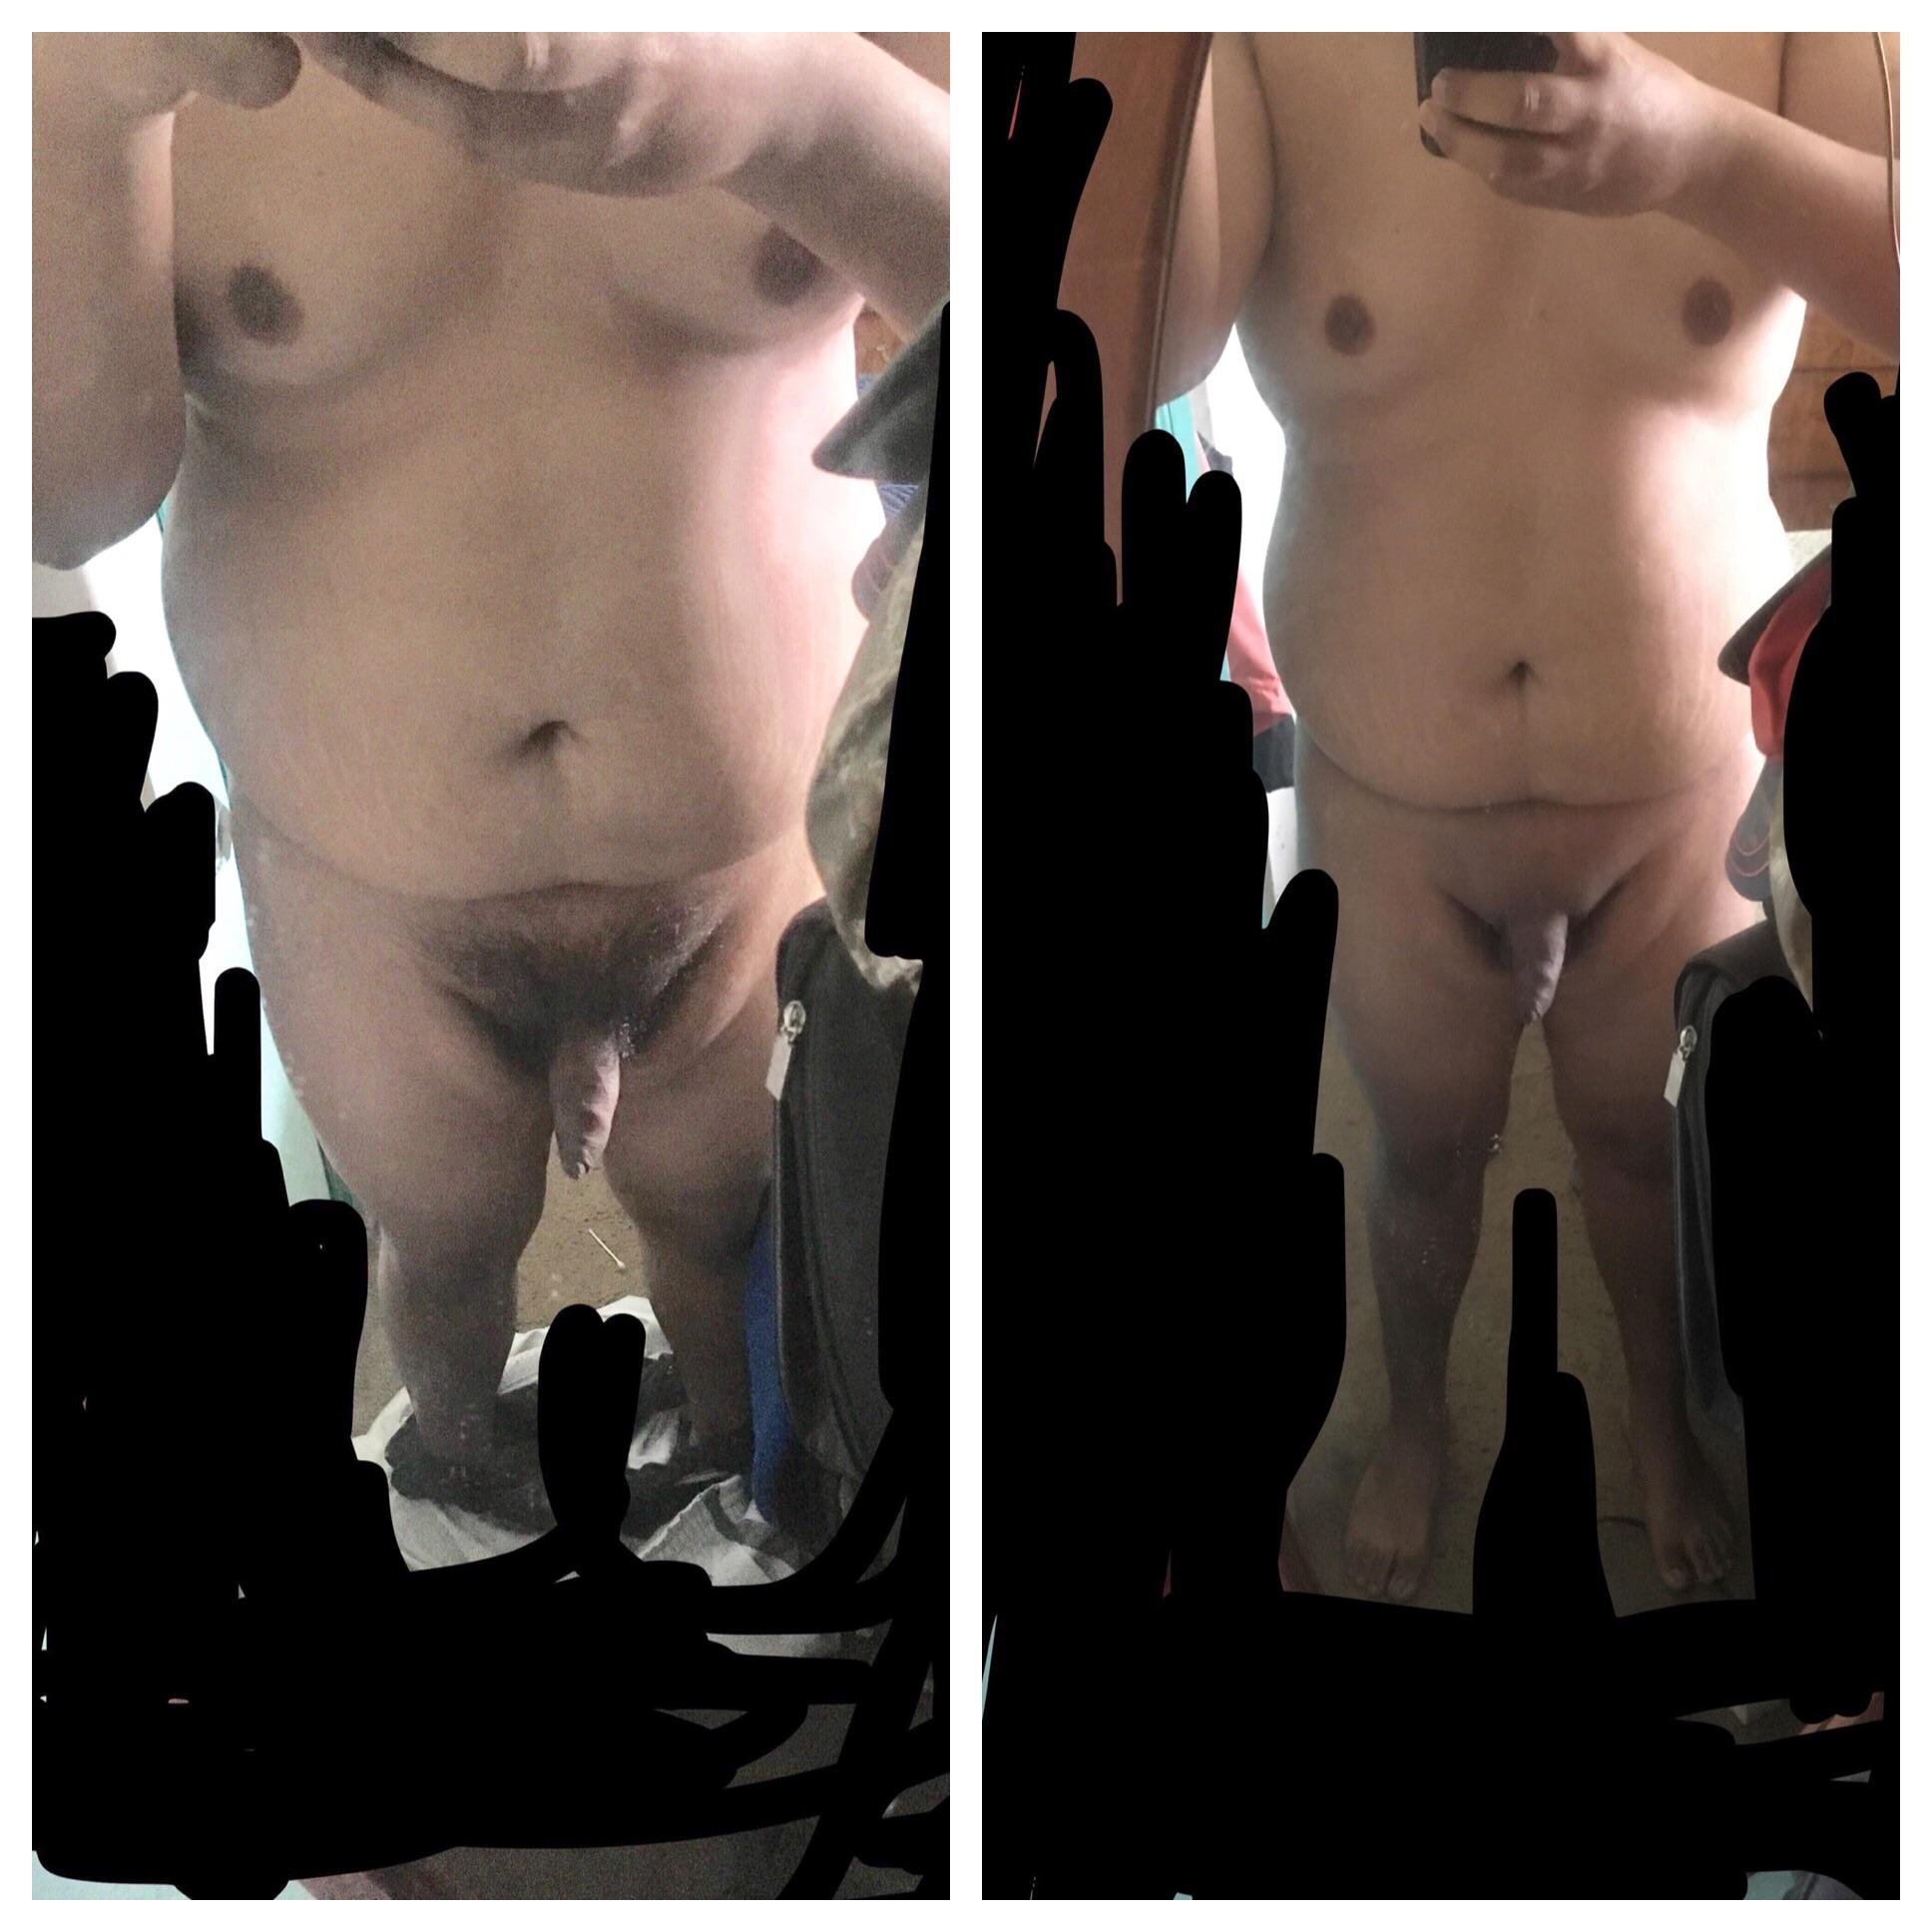 M/ 18/ 240 I've lost 15 pounds in the last month and a half and have also shaved my pubic hair since then. Thoughts and advice welcome